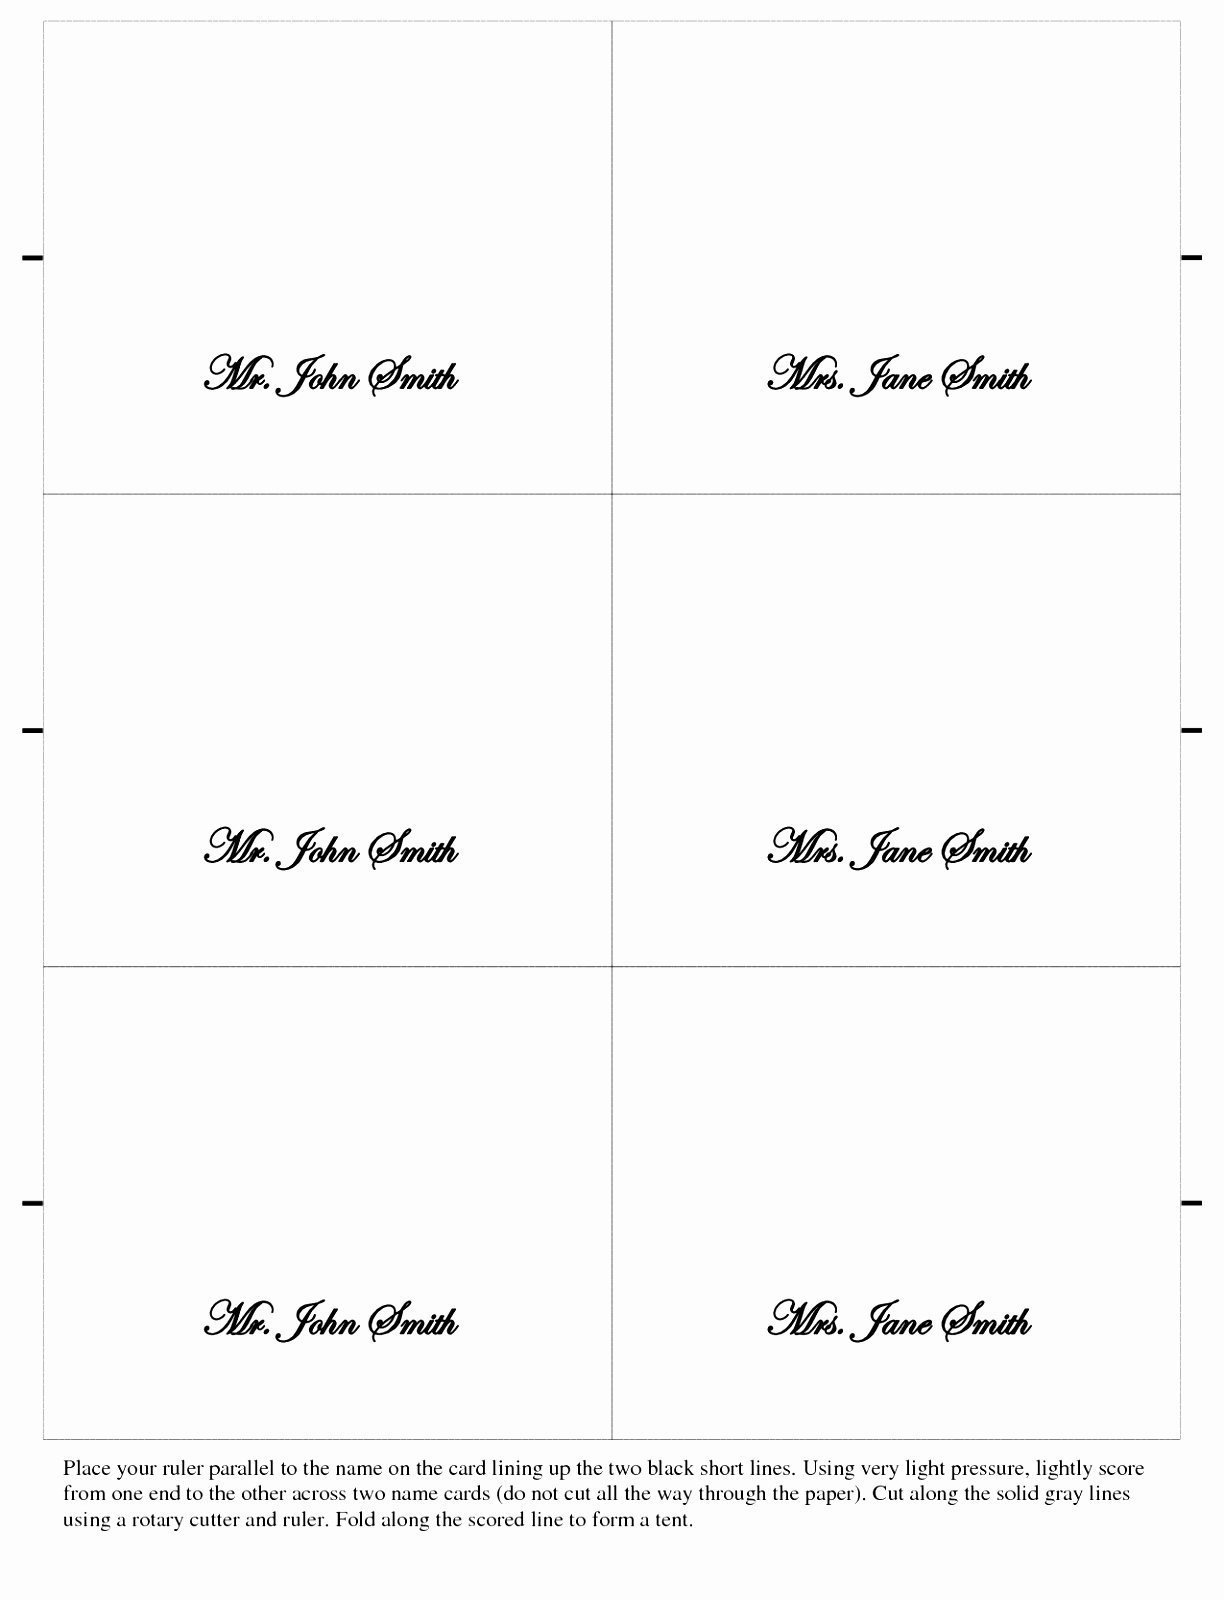 Place Cards Templates 6 Per Sheet Luxury 9 Place Card Template Word 6 Per Sheet Puiwy